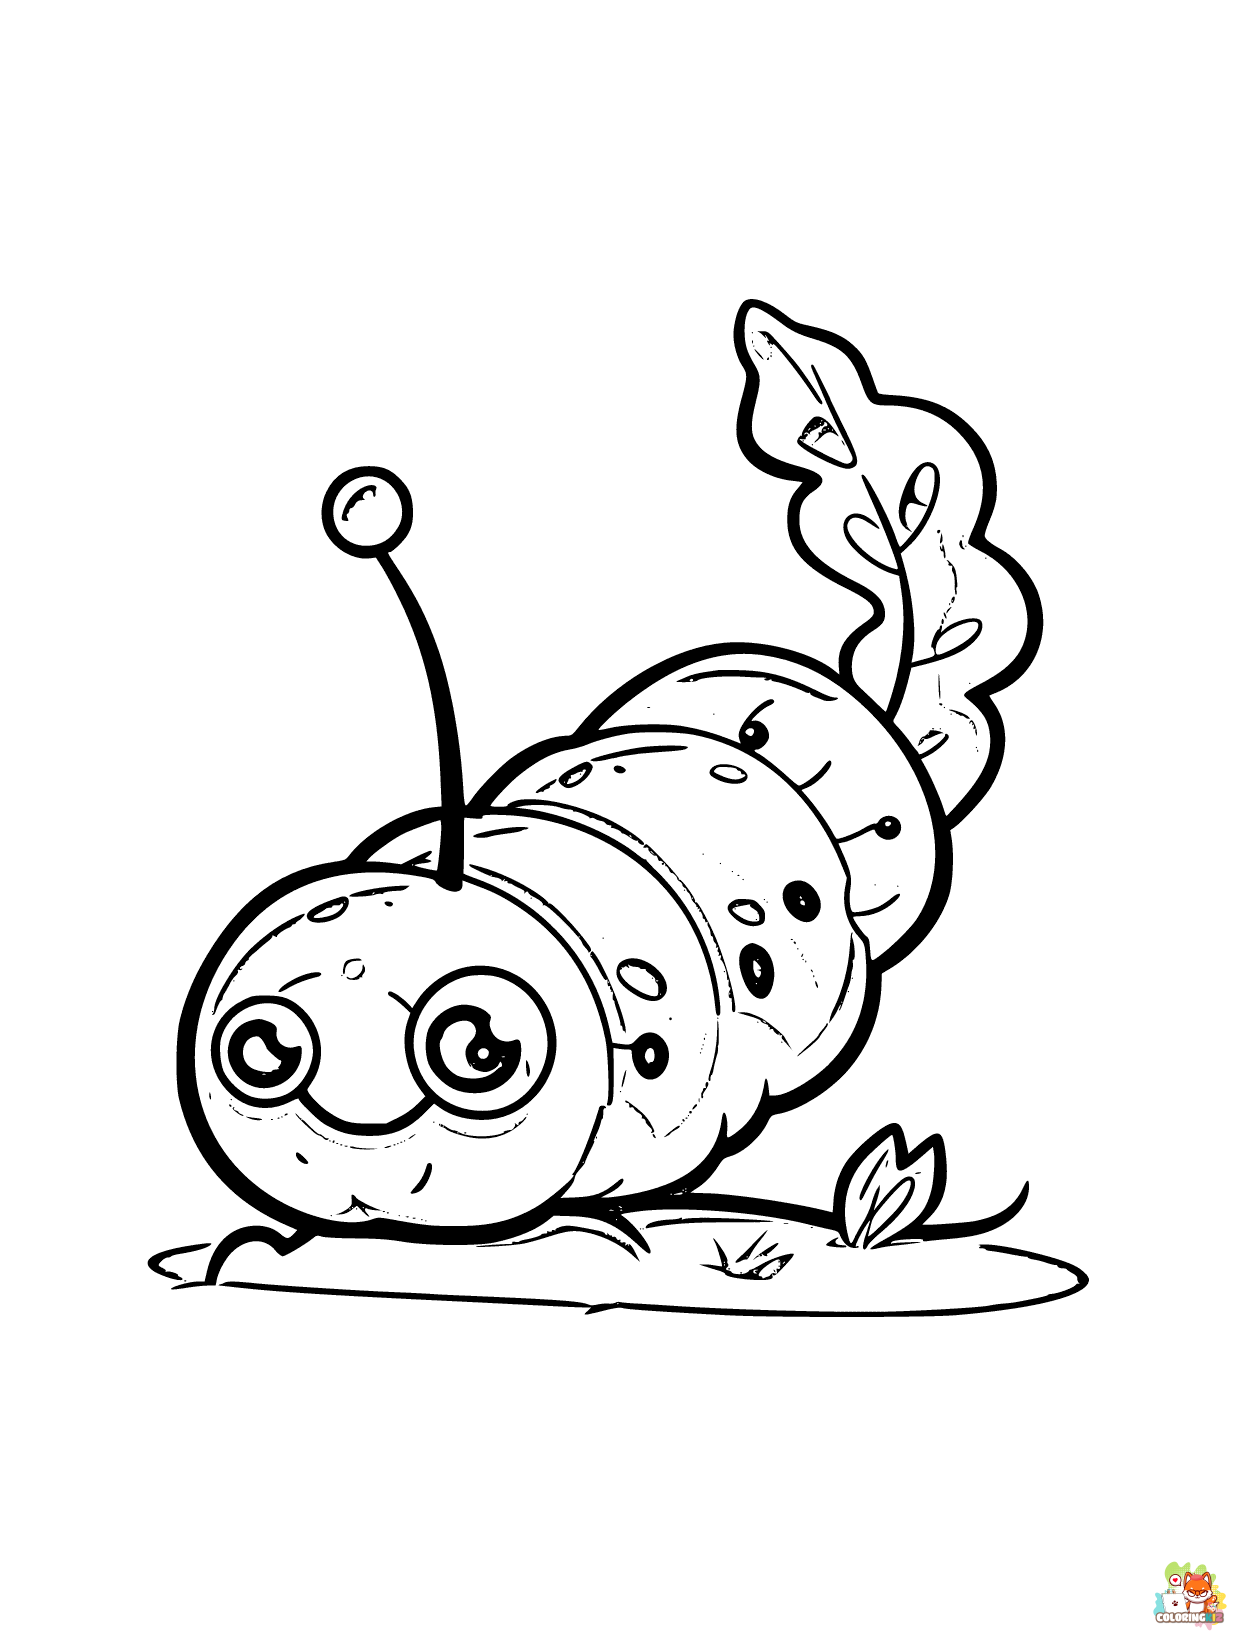 Caterpillar coloring pages printable